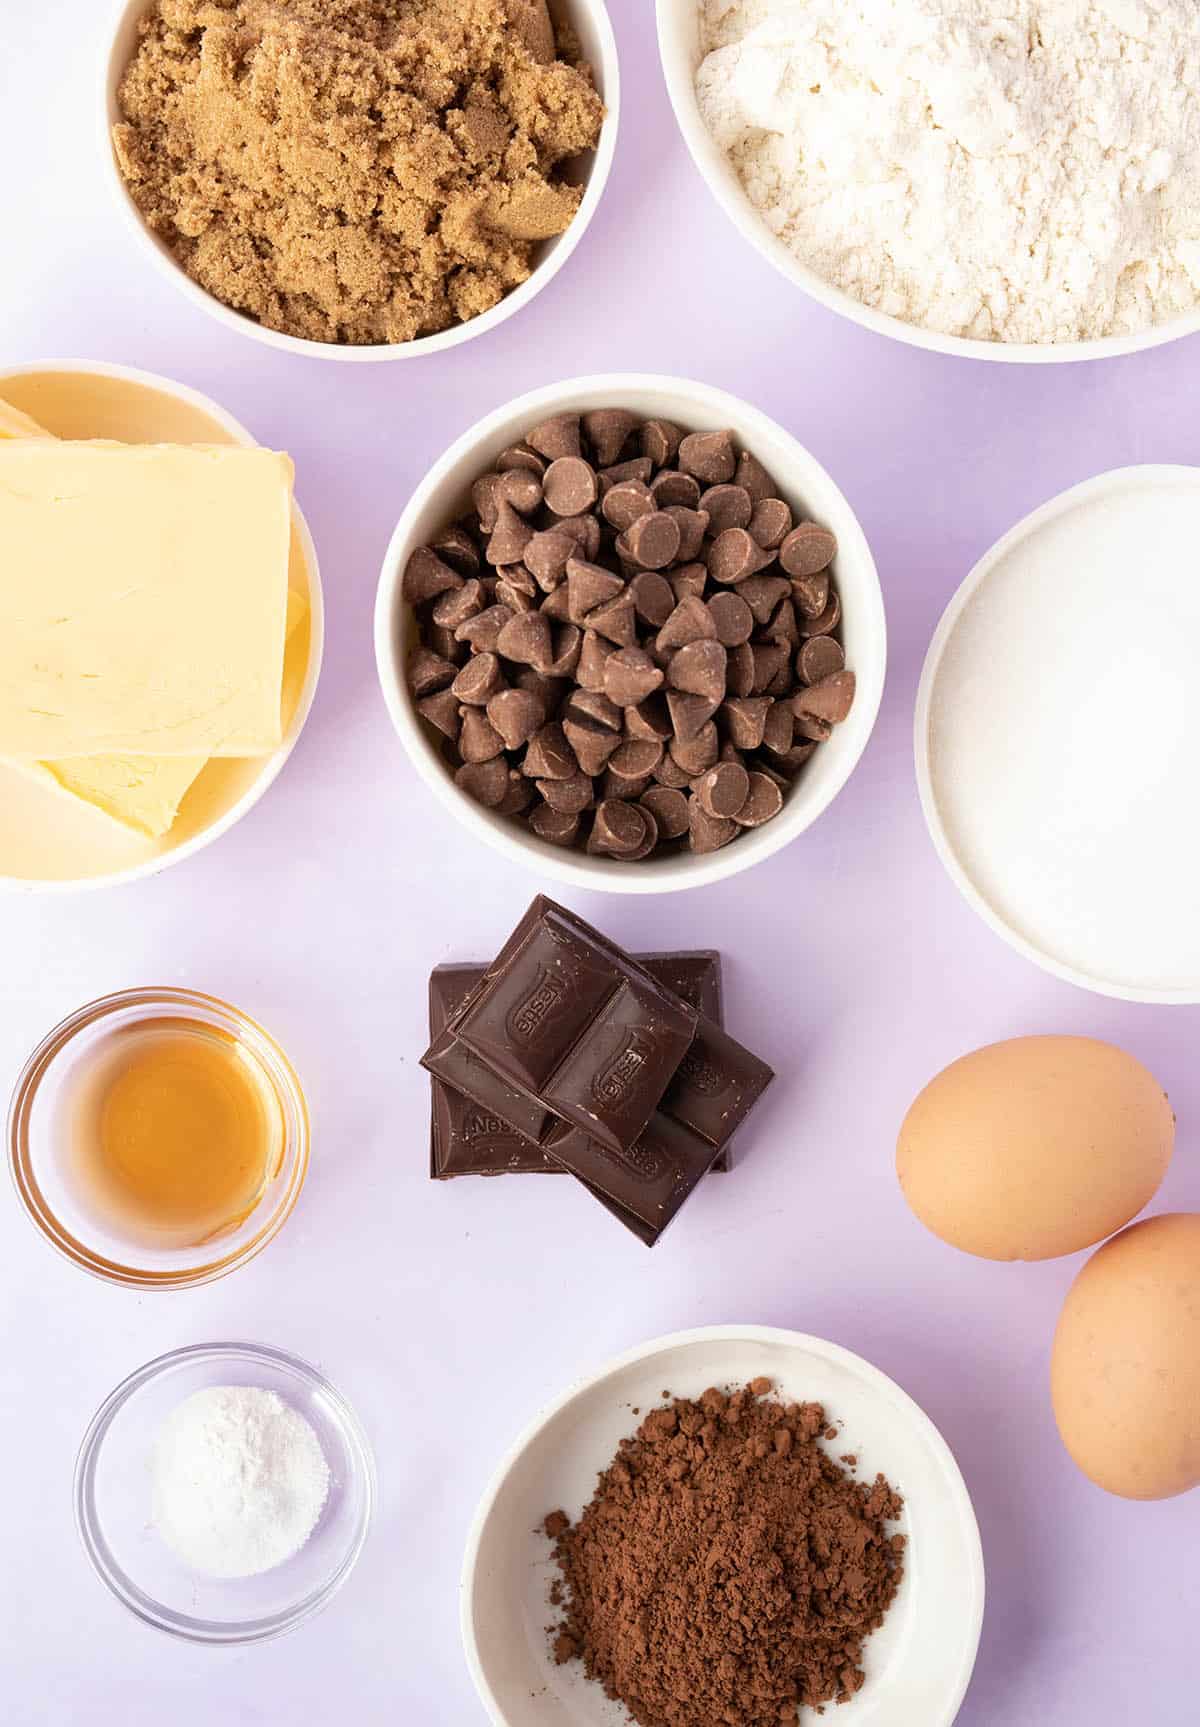 All the ingredients needed to make Brookie Cookies from scratch laid out. 